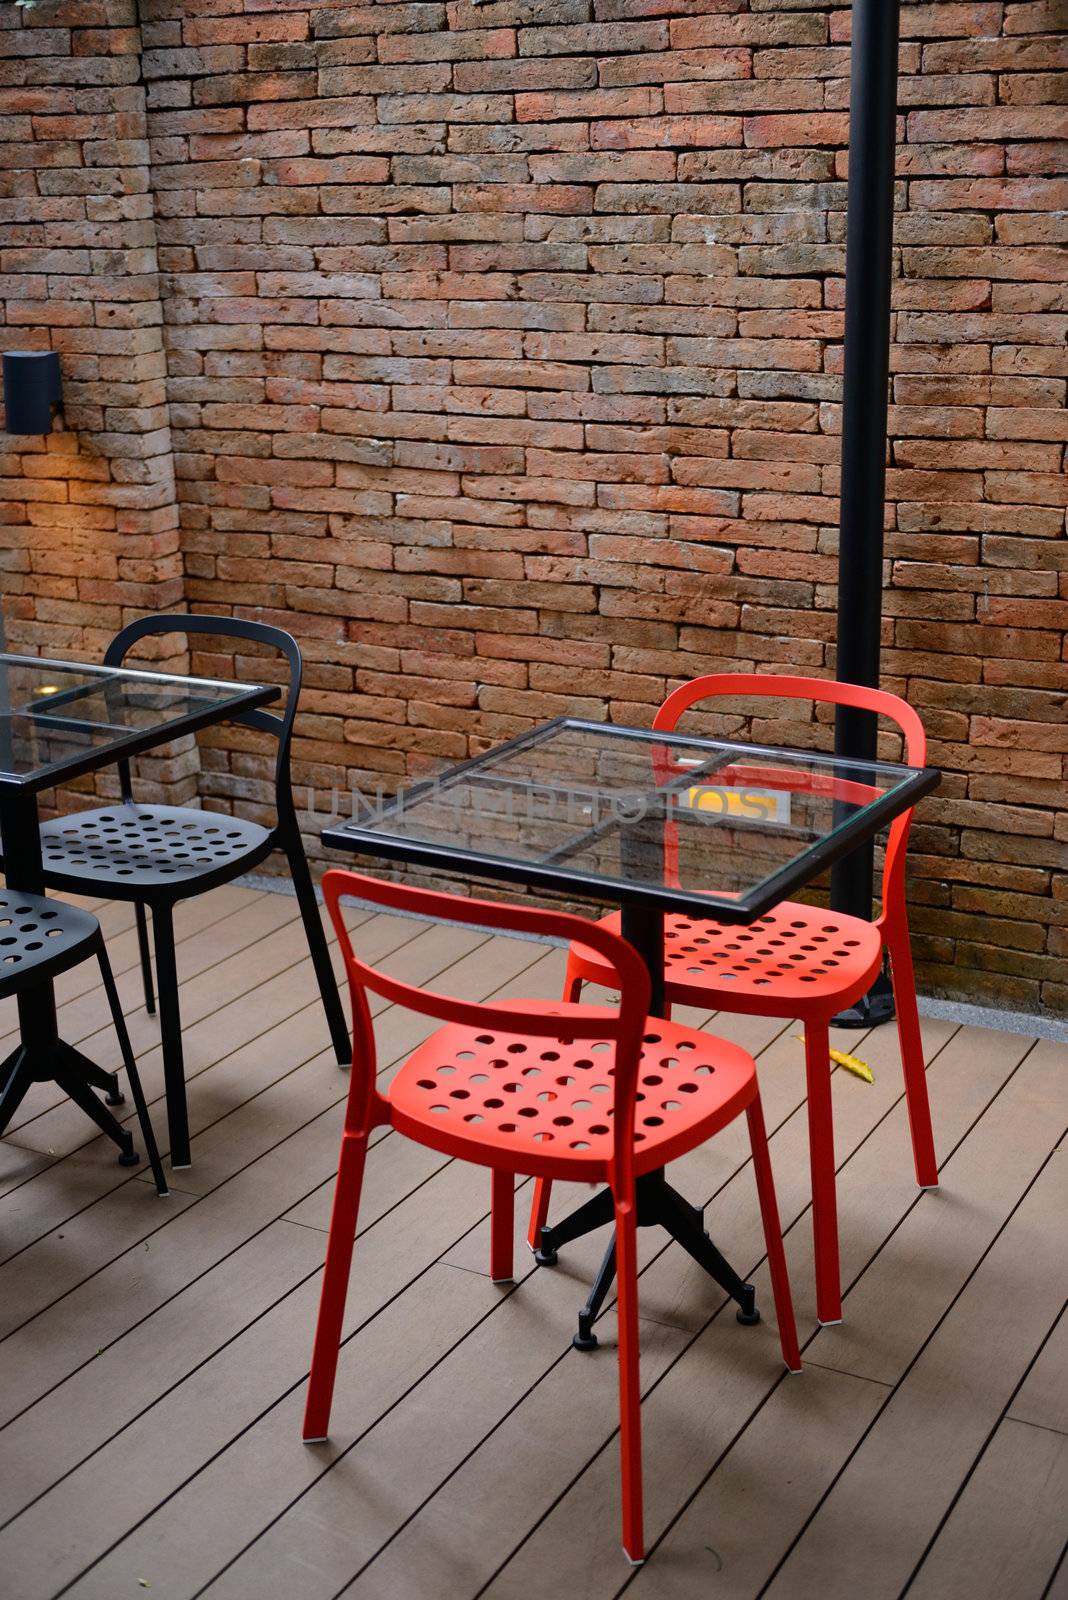 The metal red modern chair next to brick wall.